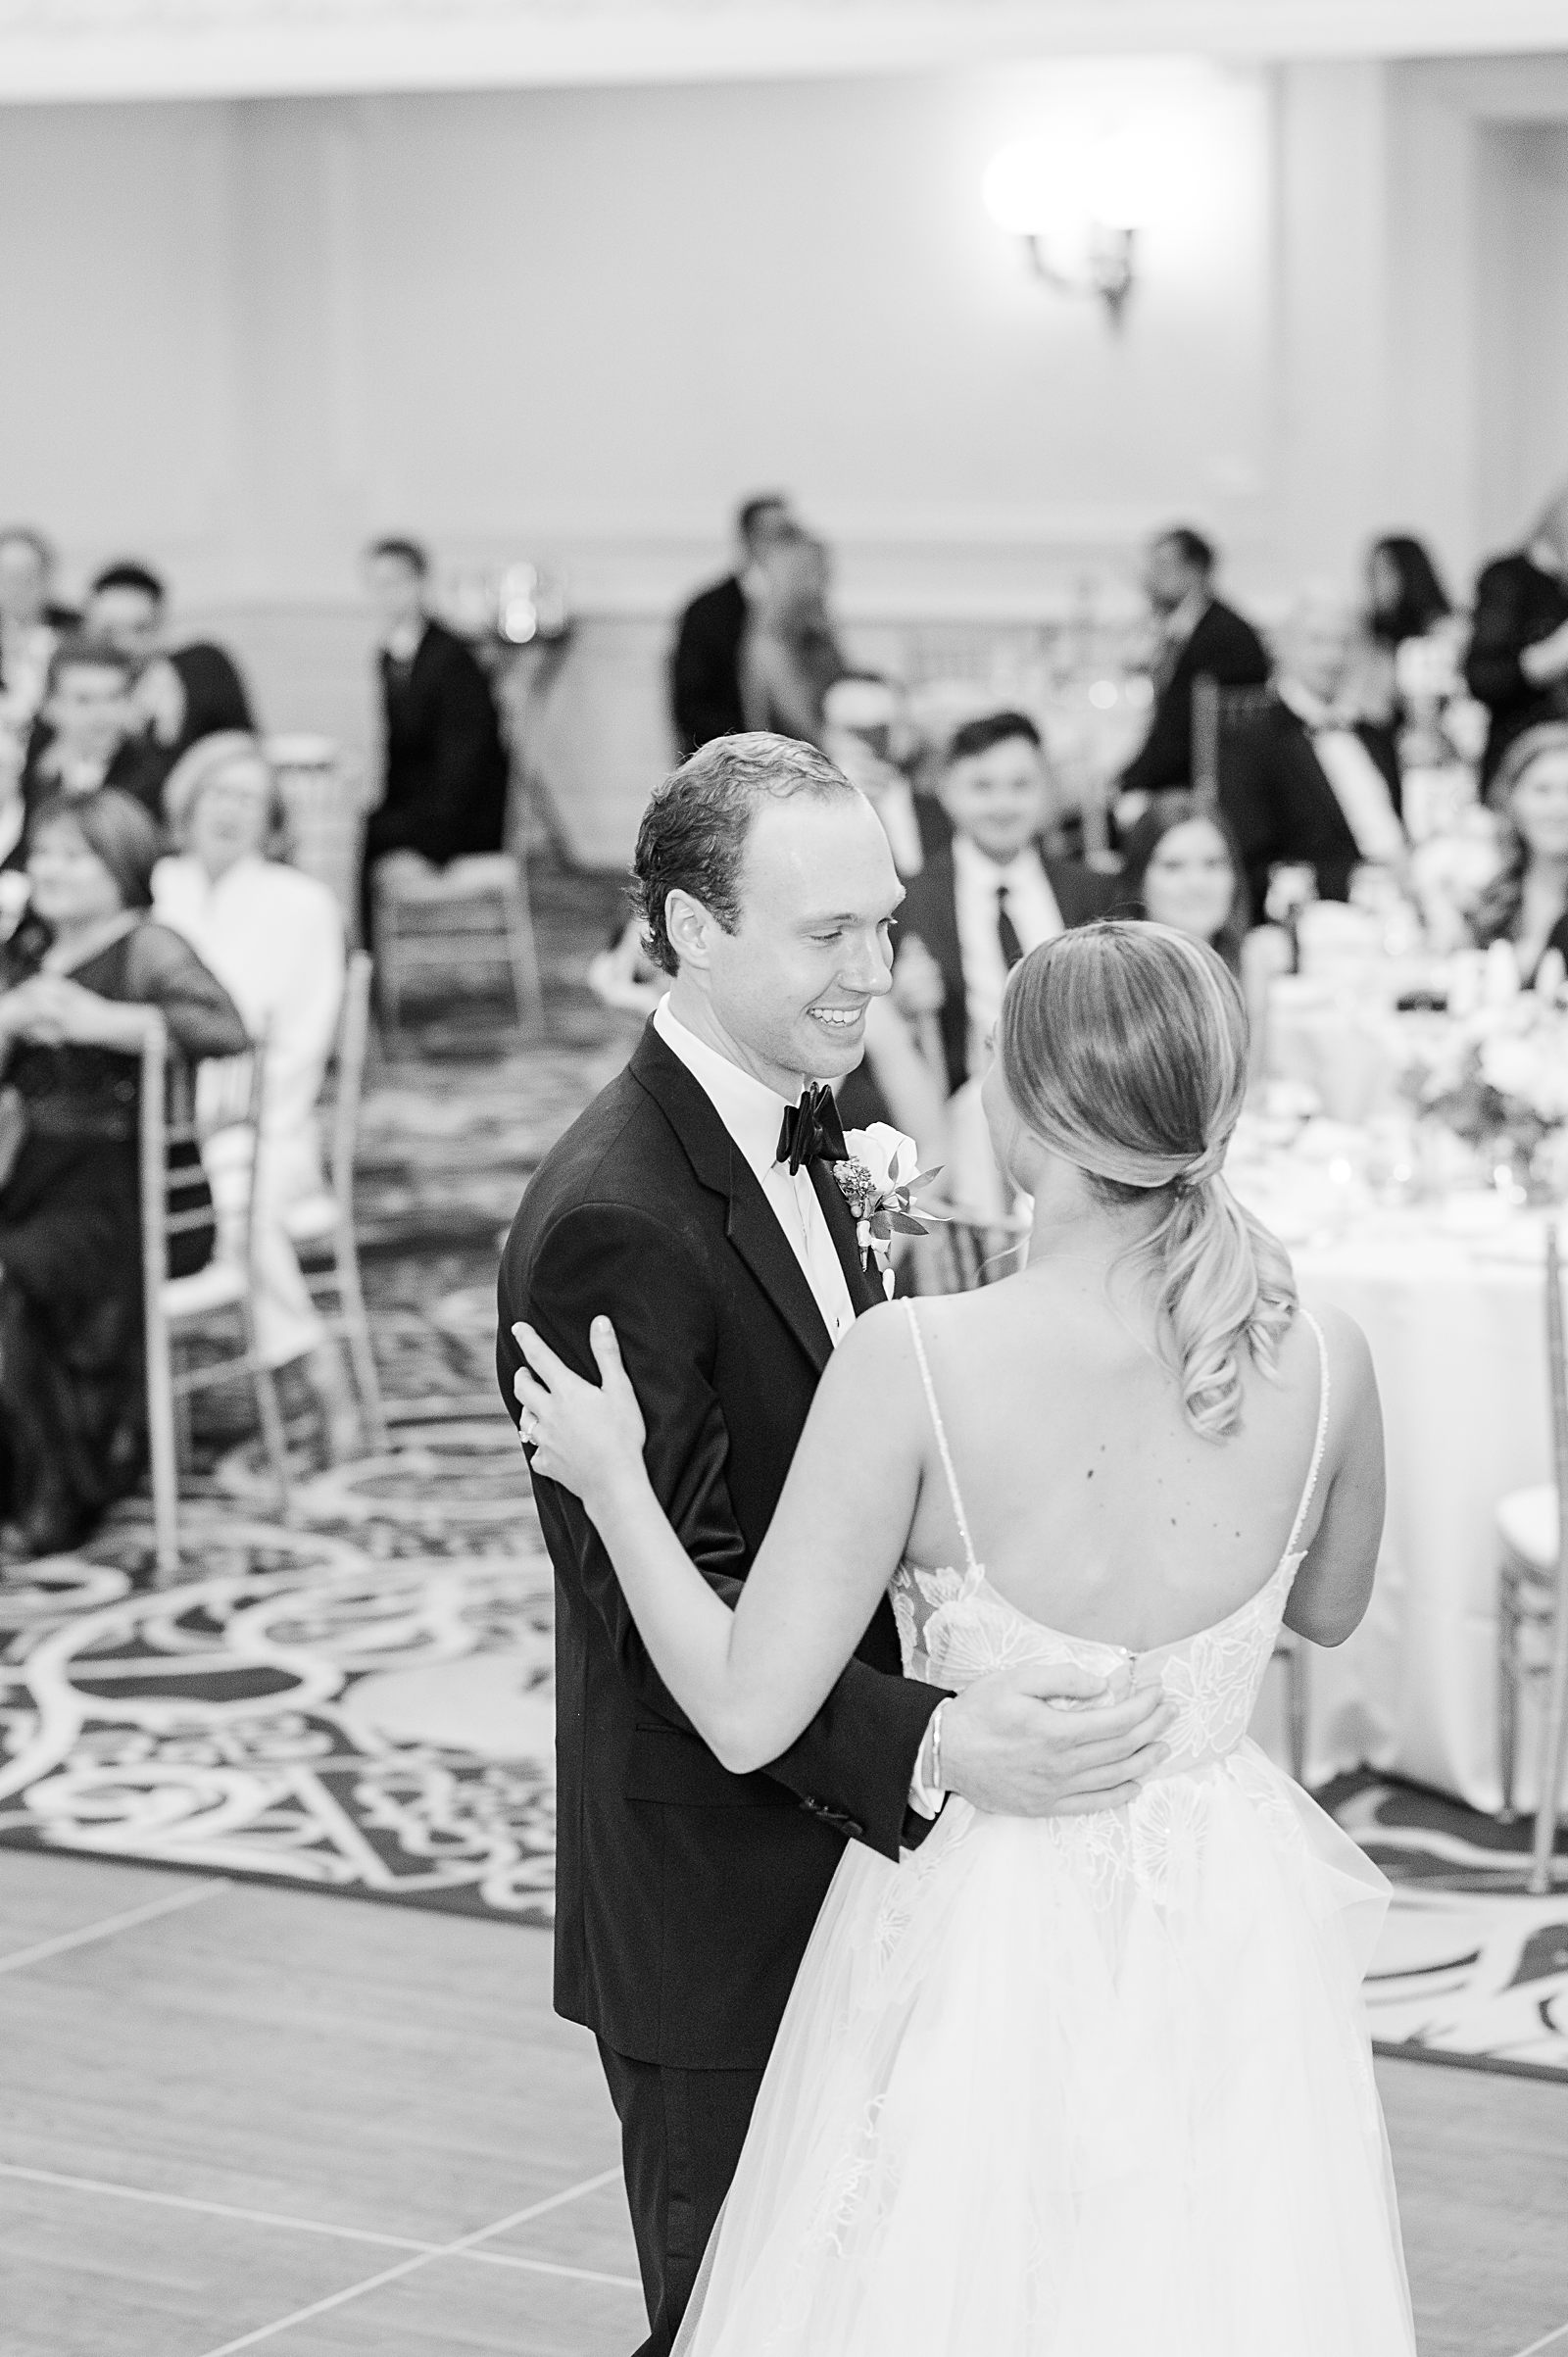 Bride and Groom First Dance During Reception at Jefferson Hotel Wedding. Richmond Wedding Photographer Kailey Brianne Photography